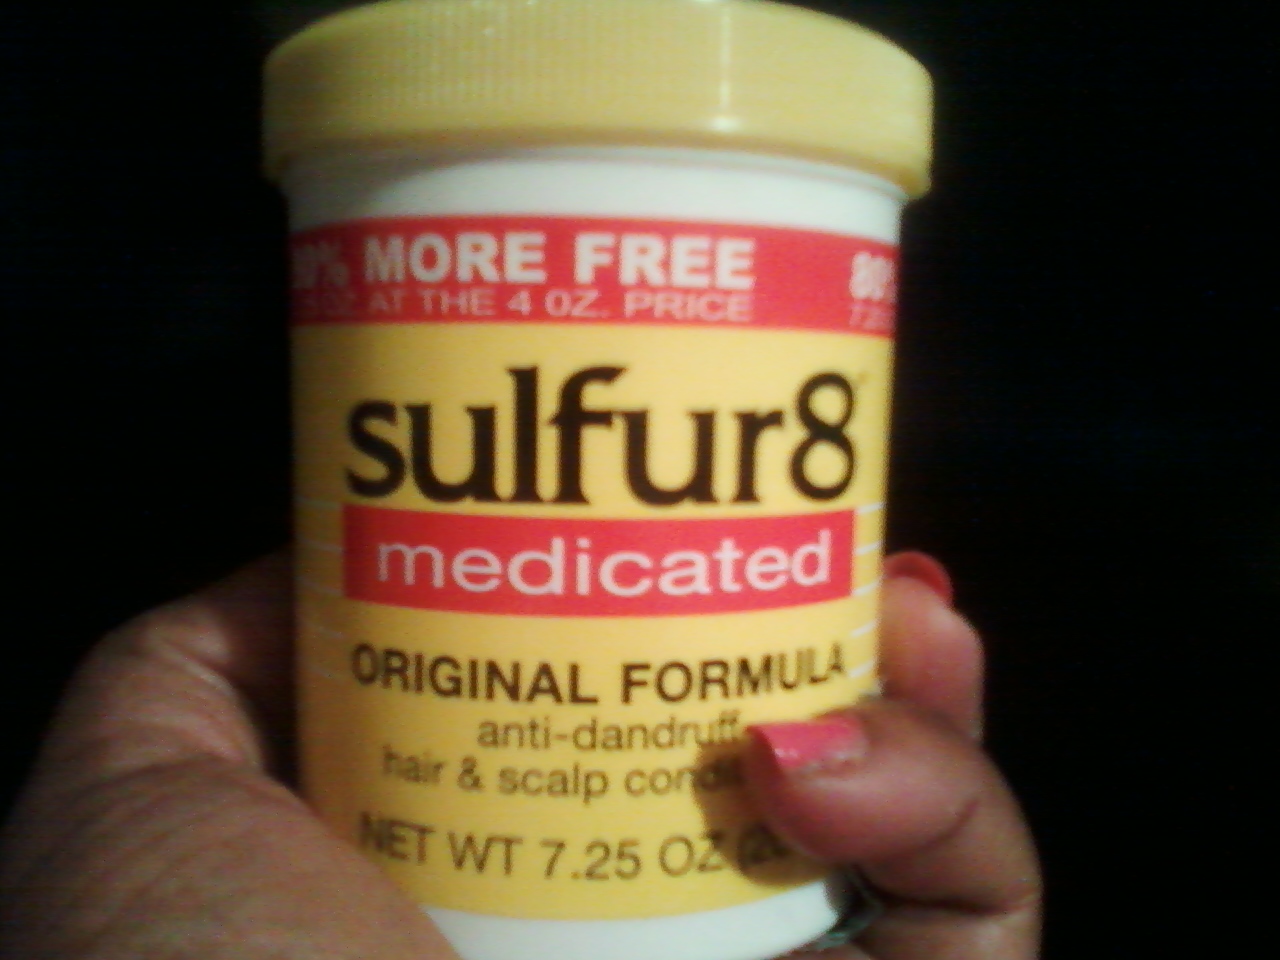 My Nubian Hair Care Blog Sulfur 8 Hair Products Do They Make